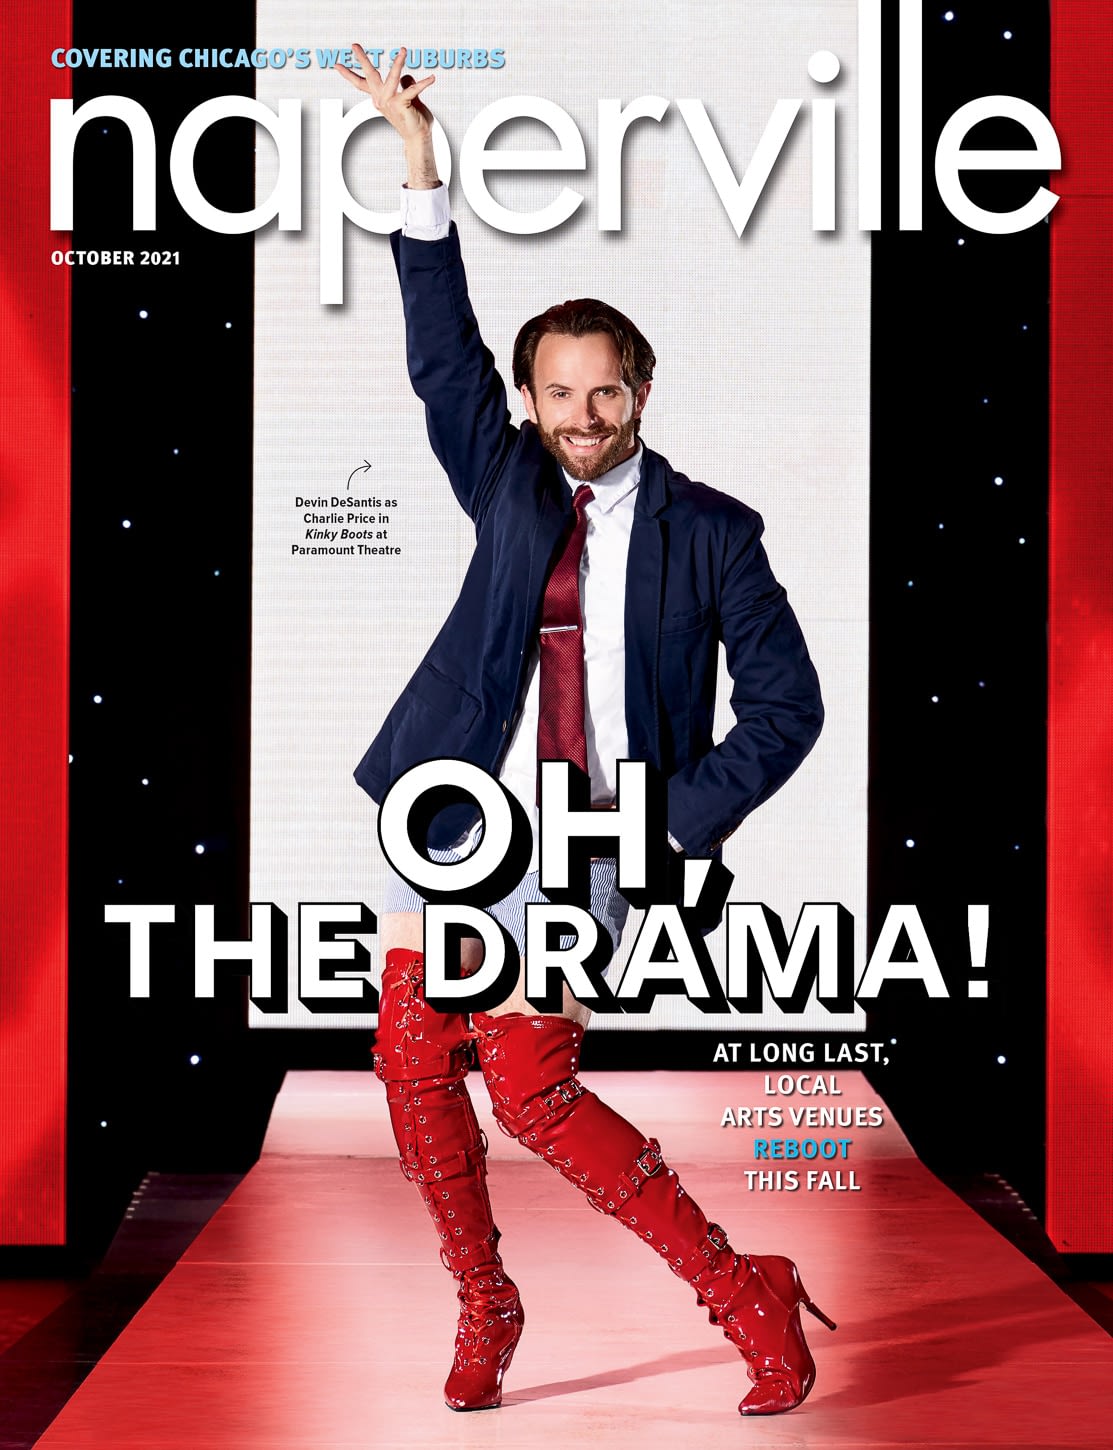 Oh, The Drama! for Naperville Magazine